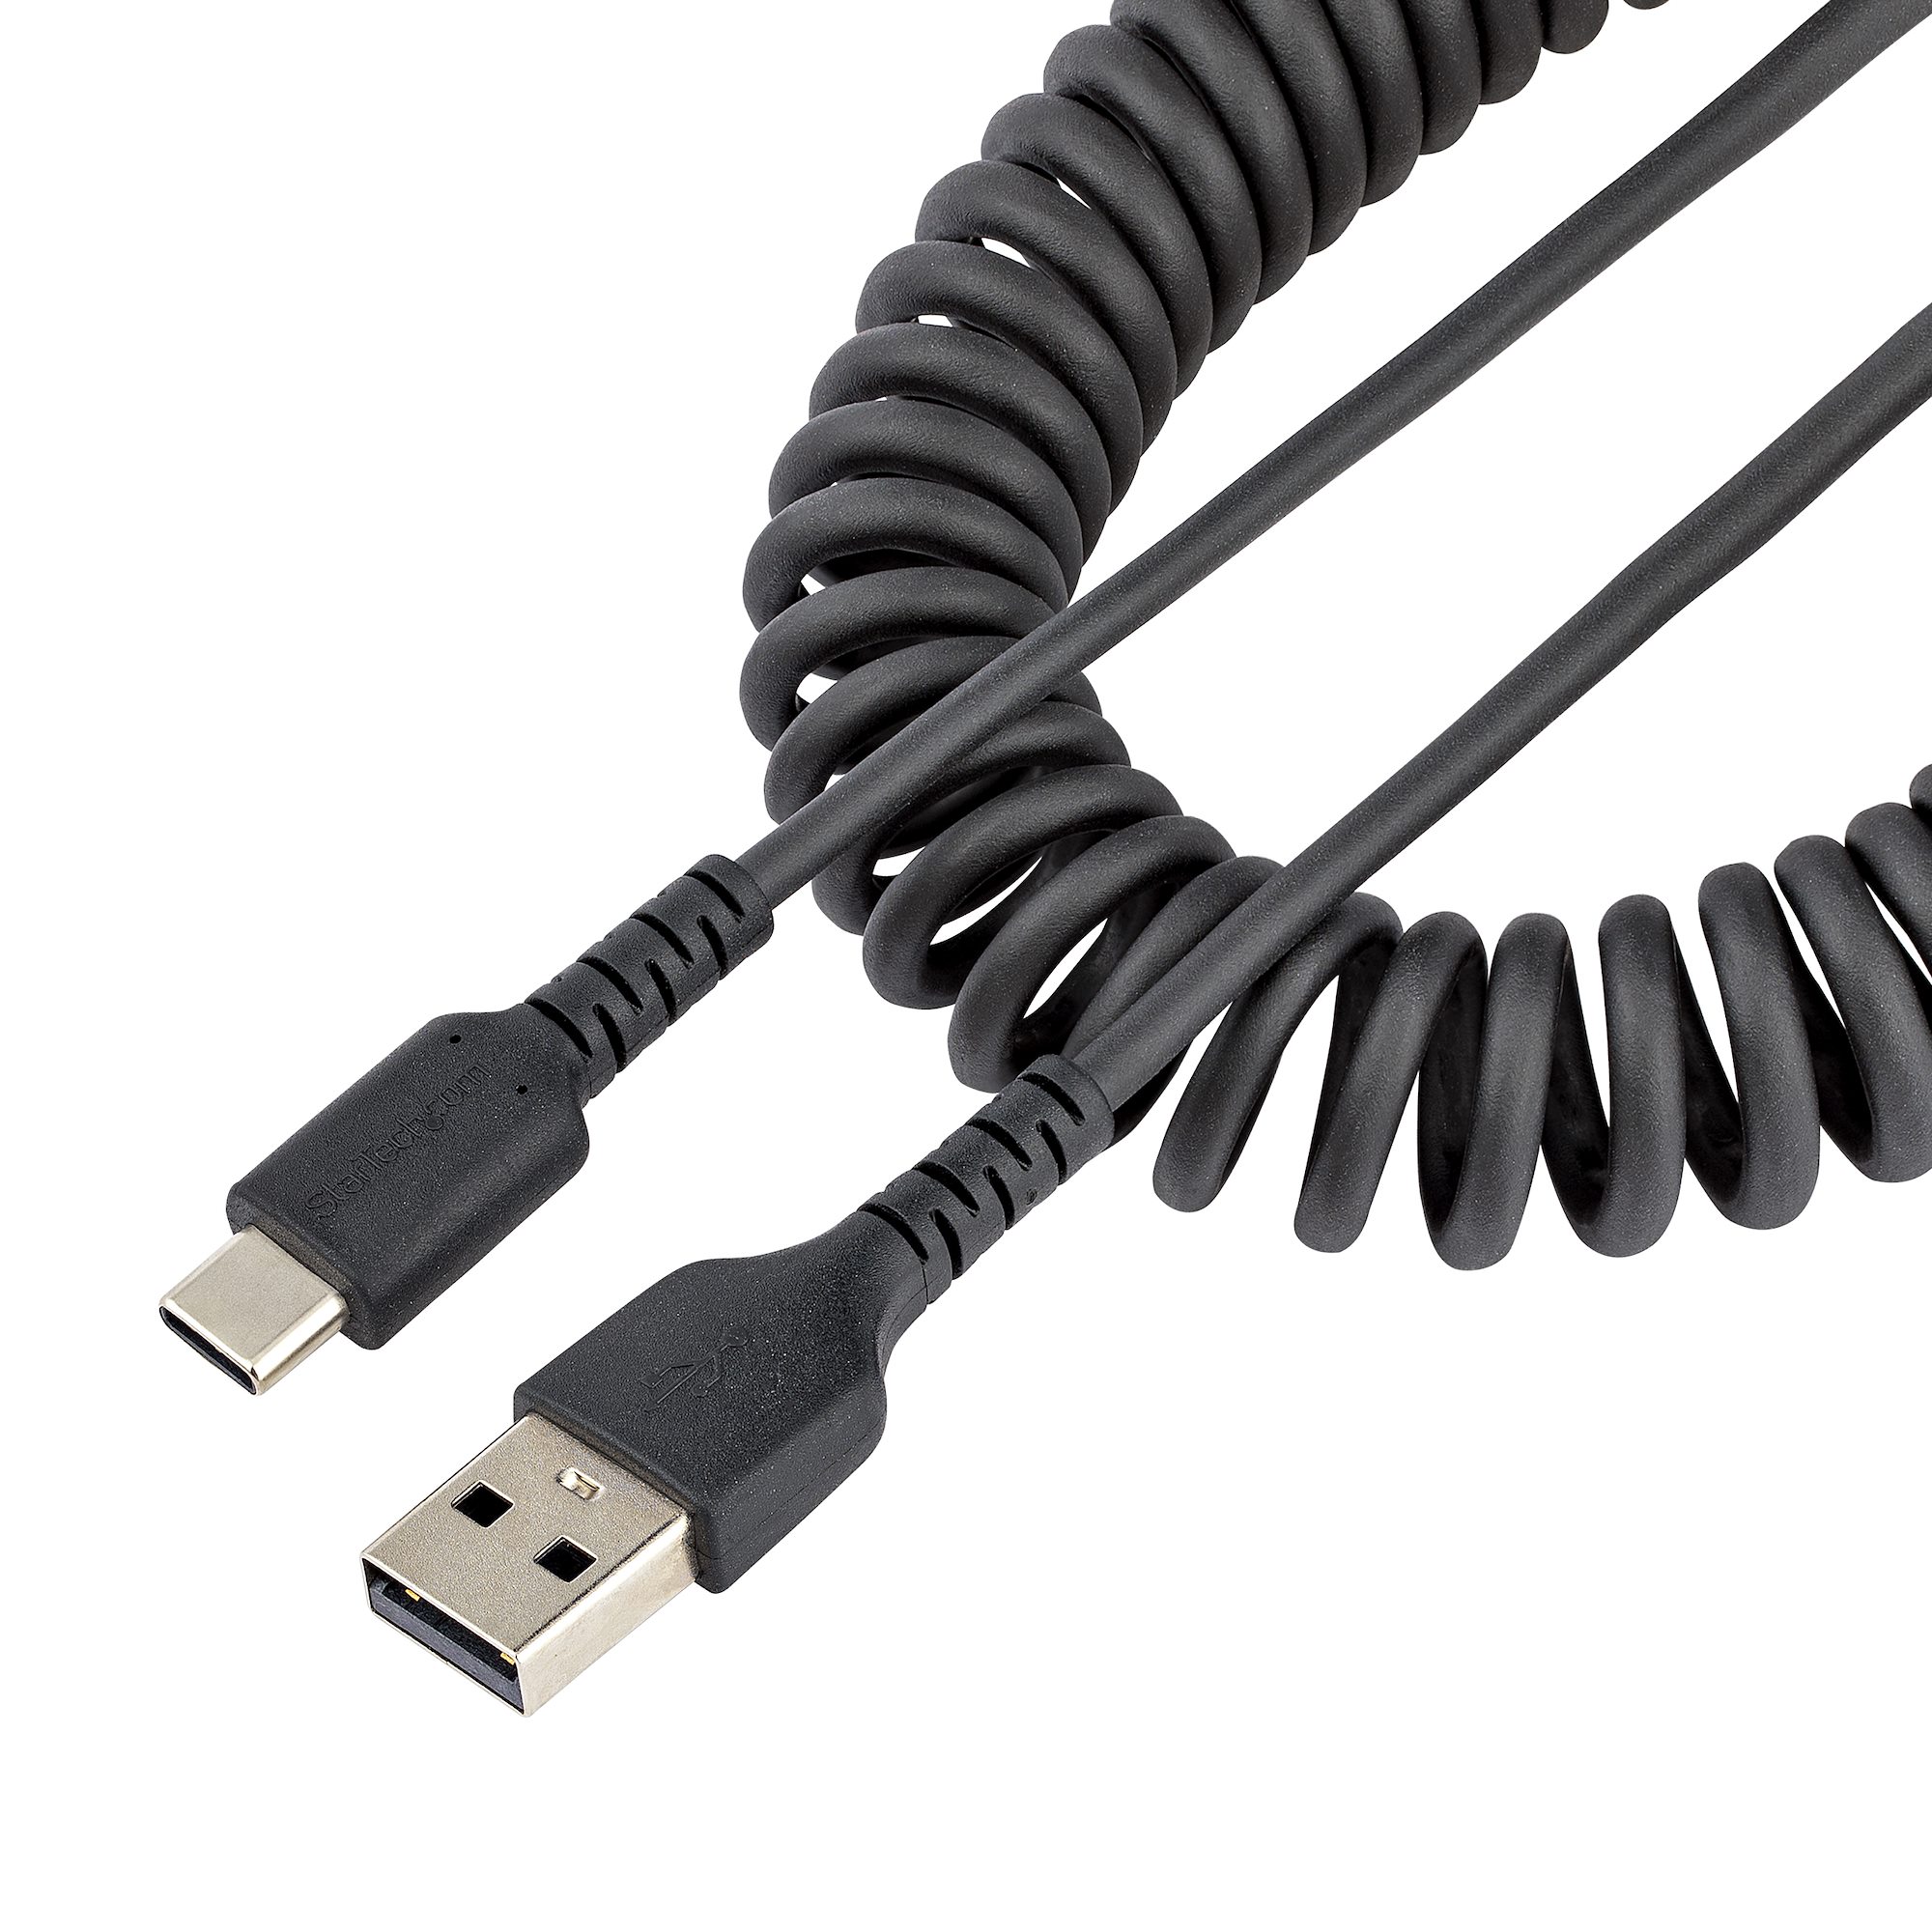 3.3ft (1m) USB 2.0 A to Mini-B Cable, USB 2.0 Cables, USB Cables,  Adapters, and Hubs